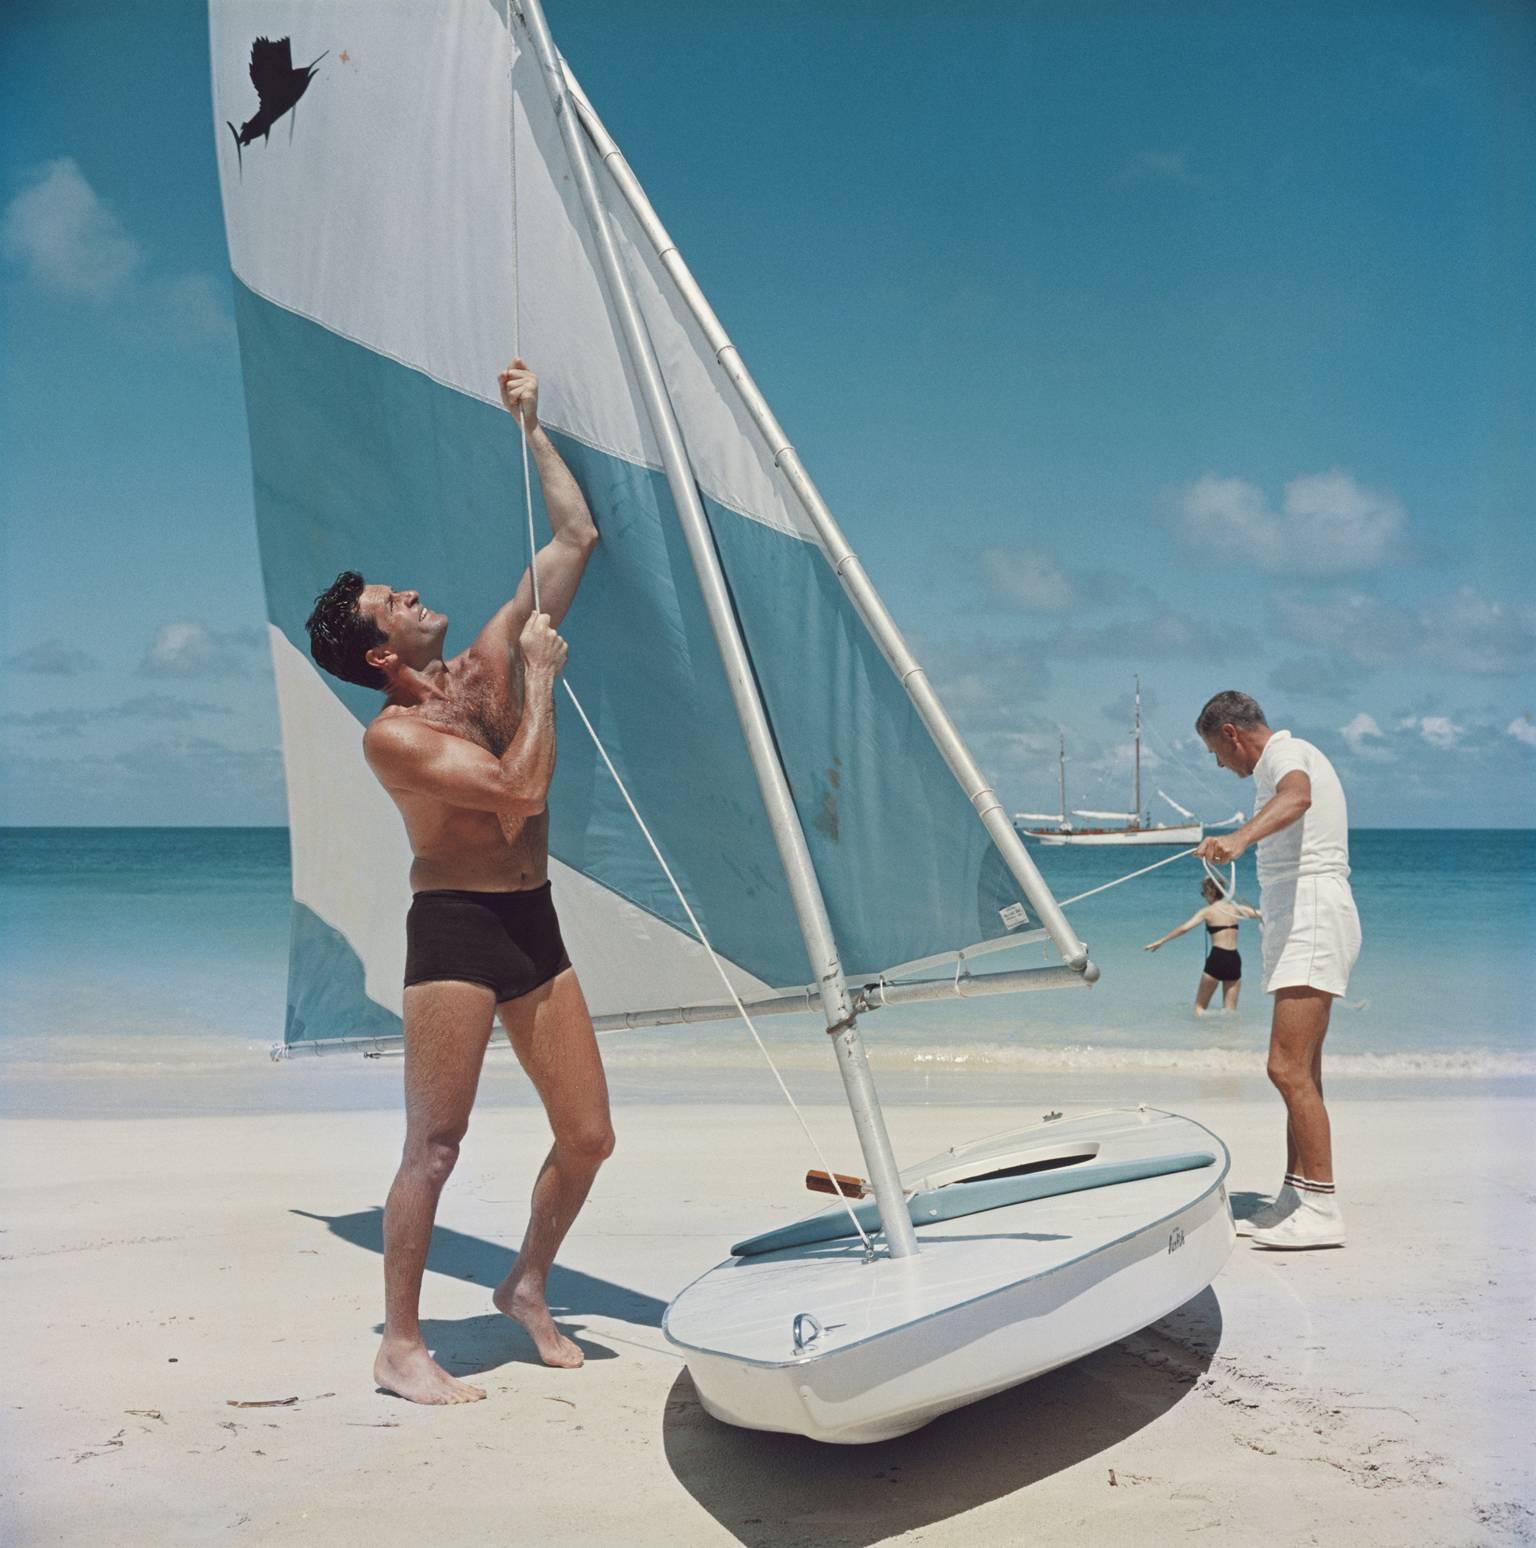 'Boating In Antigua' by Slim Aarons

American actor Hugh O'Brian (left) hoists the sail on a dinghy, Antigua, West Indies, 1961. (Photo by Slim Aarons)

Another 'typically Slim' photograph, this one epitomises the glorious, vintage style and glamour